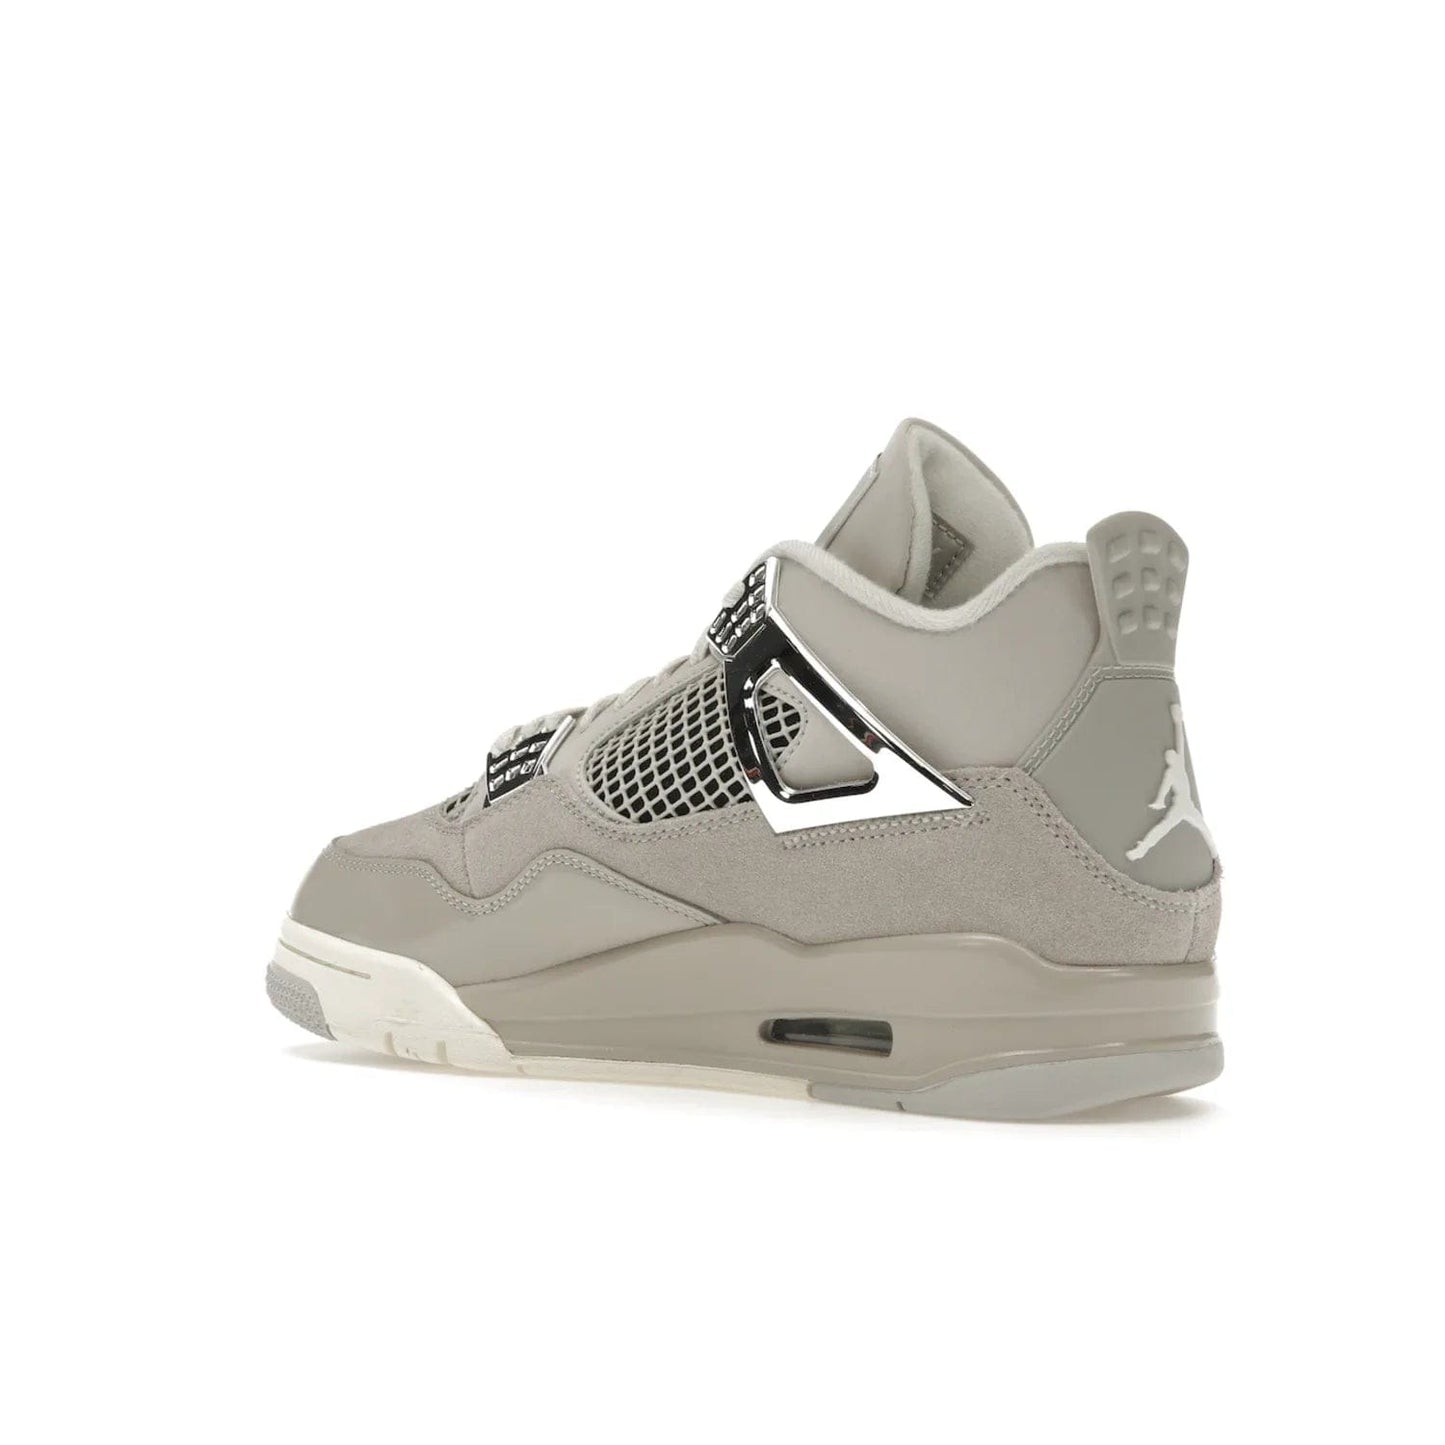 Jordan 4 Retro Frozen Moments (Women's) - Image 23 - Only at www.BallersClubKickz.com - The Jordan 4 Retro Frozen Moments is a stylish blend of classic design elements and modern tones. Featuring suede and leather overlays in a light iron-ore, sail, neutral grey, black, and metallic silver colorway. Get this iconic high-performance sneaker for $210.